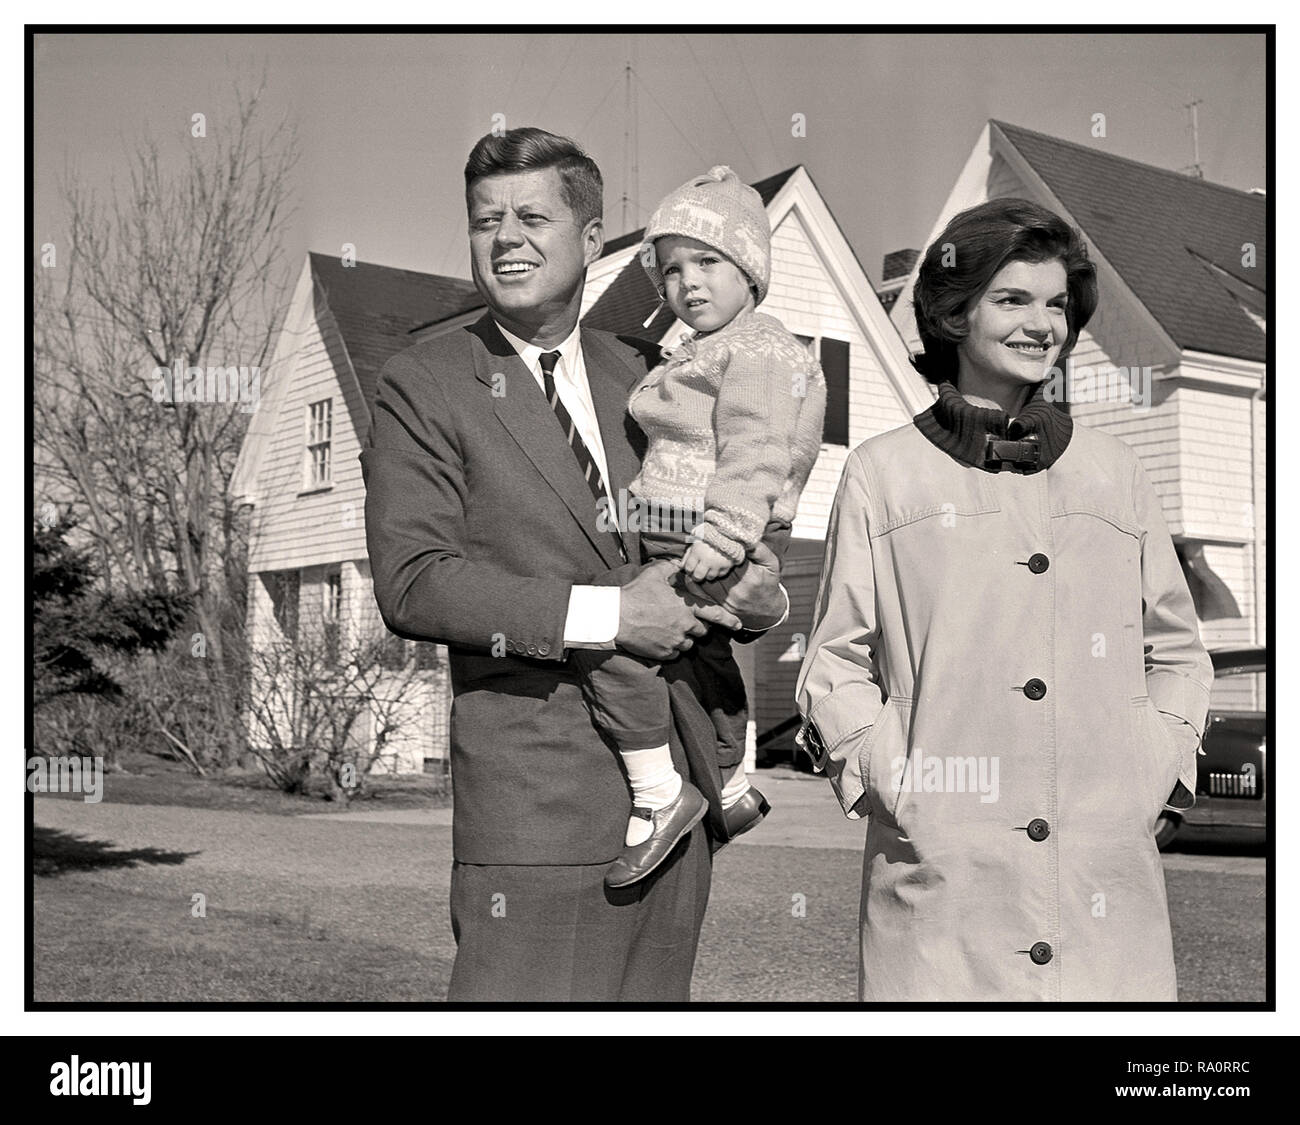 JOHN F KENNEDY JFK Nov 8th 1960, The Election Day Win.  Massachusetts Sen. John F. Kennedy defeated Vice President Richard M. Nixon for the presidency. Dem Presidential nominee Sen John F Kennedy wife Jacqueline and daughter Caroline outside their home Hyannis Port Mass. Nov 8th 1960 Election day Kennedy won 303 electoral votes to Nixons 219 Stock Photo